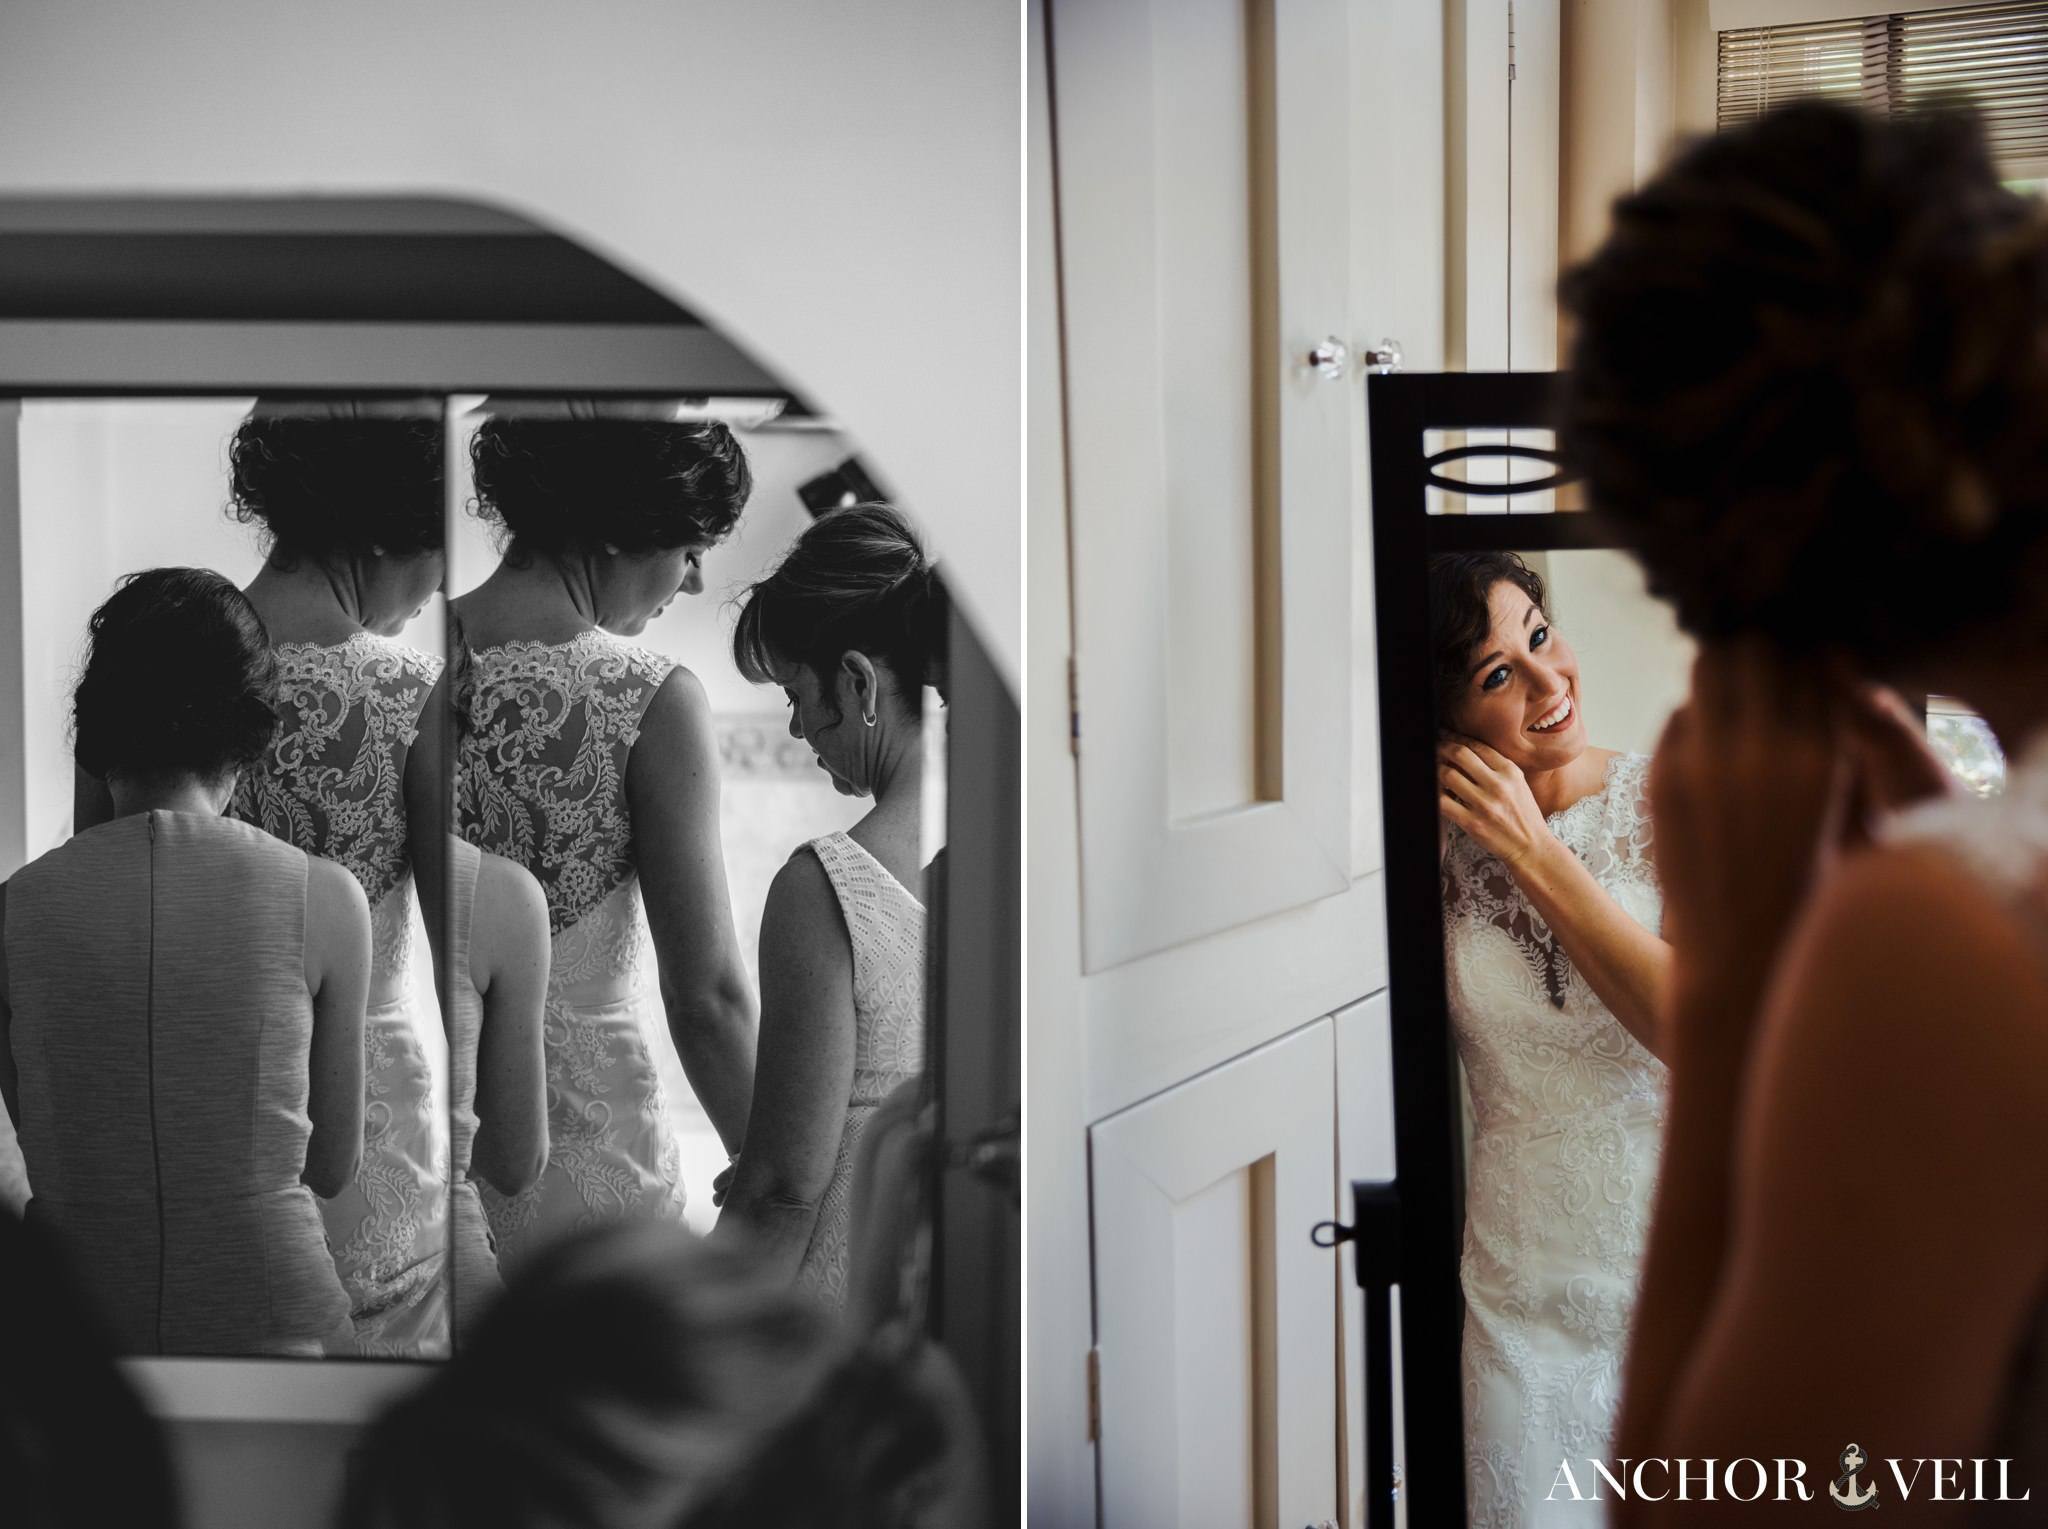 helping get the dress on in the mirror during their Forsyth Park Wedding Elopement